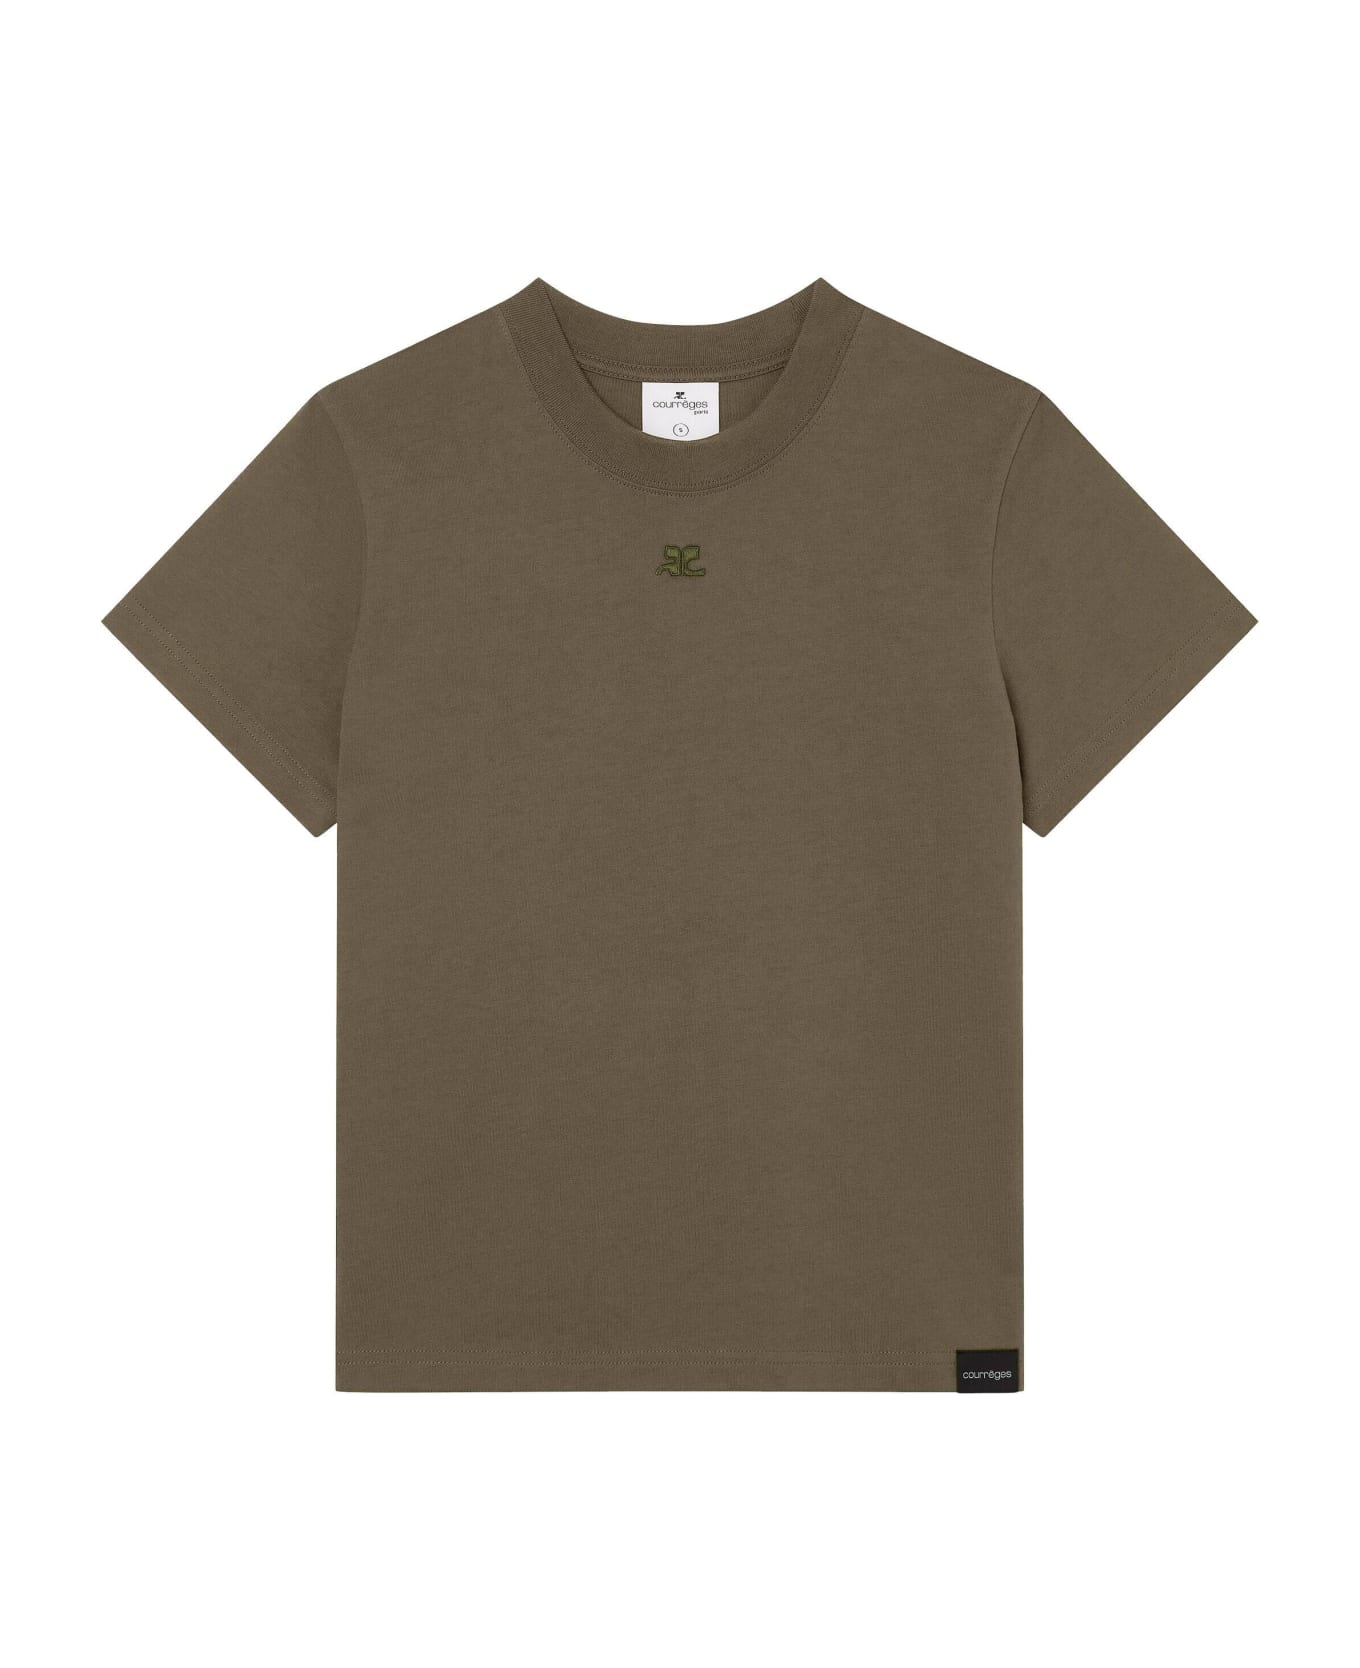 Courrèges T Shirt Girocollo - Camouflage Green Tシャツ